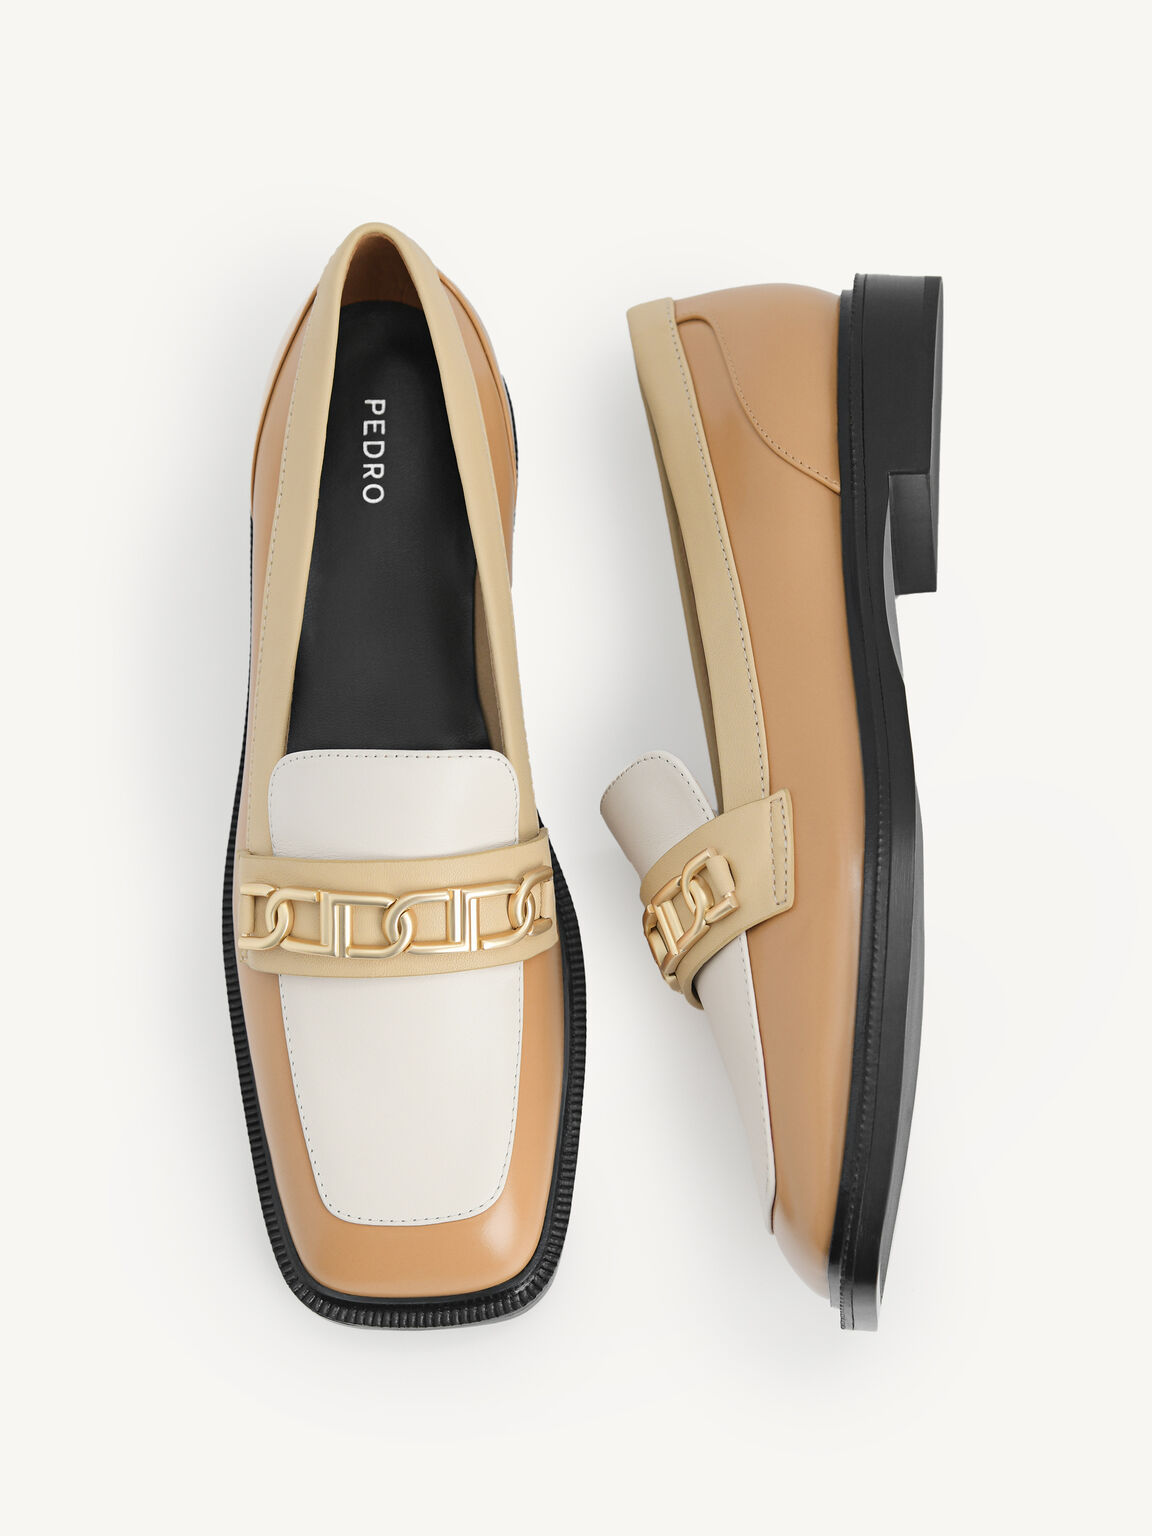 PEDRO Icon Leather Square Toe Loafers, Camel